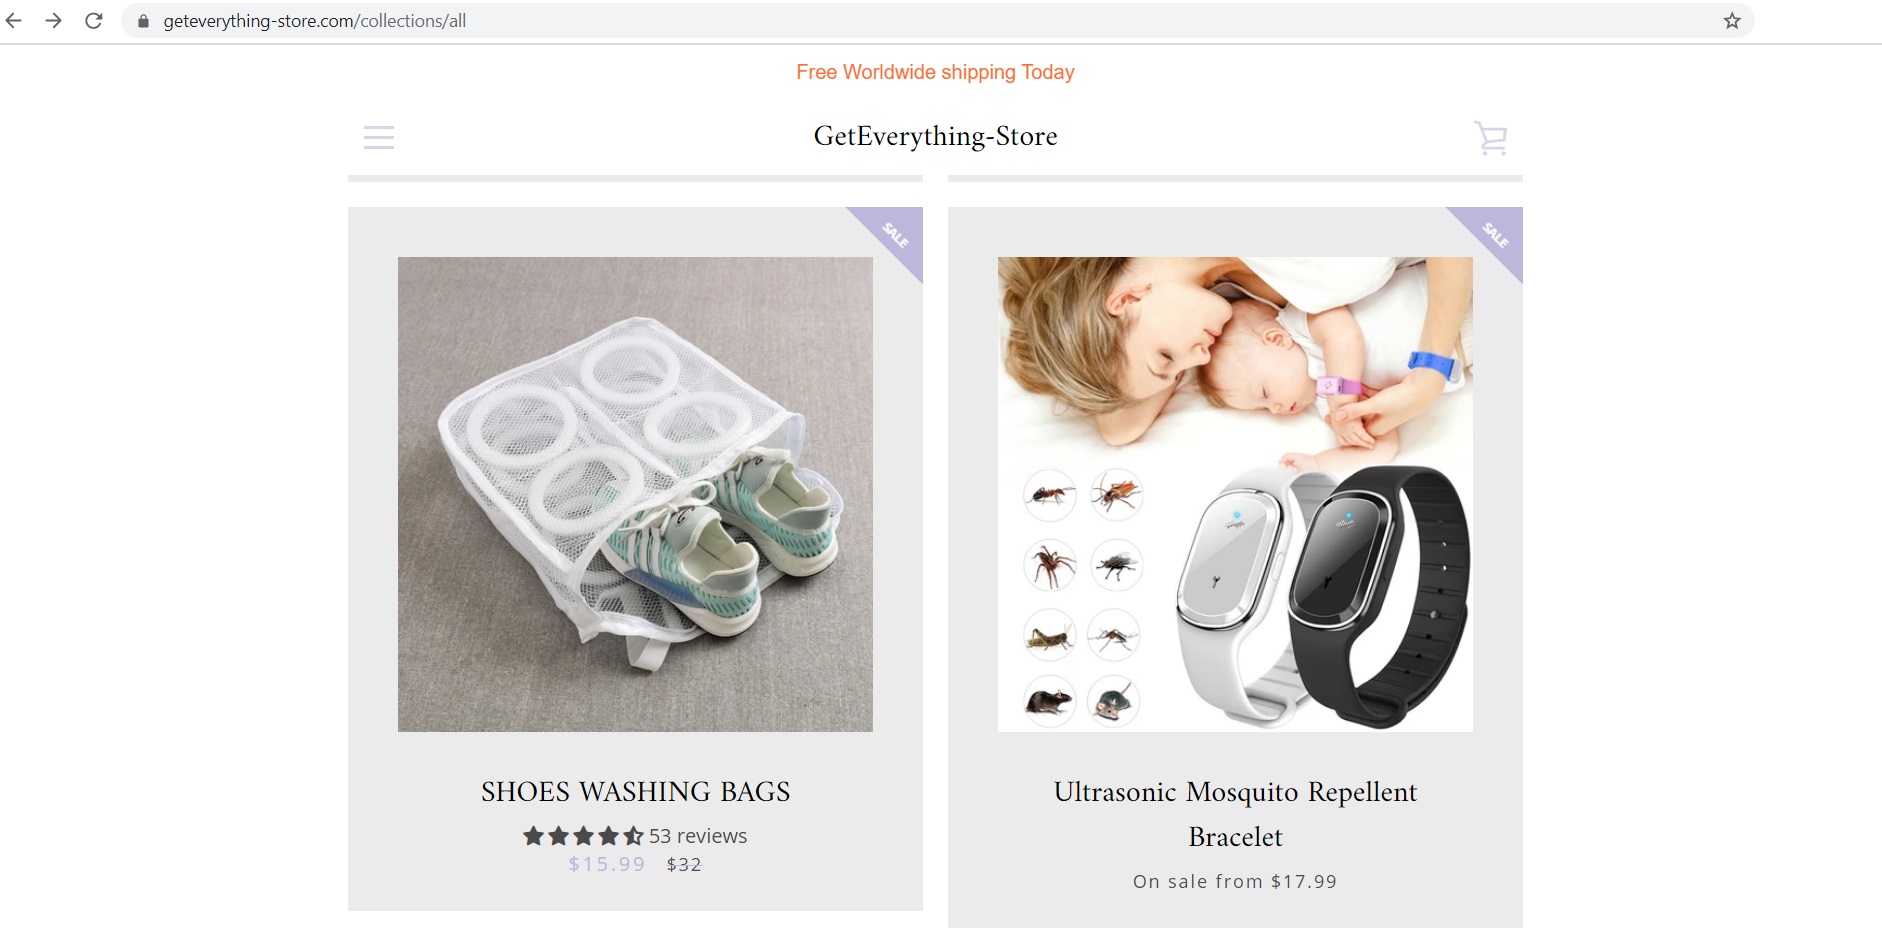 Geteverything-store at geteverything-store.com